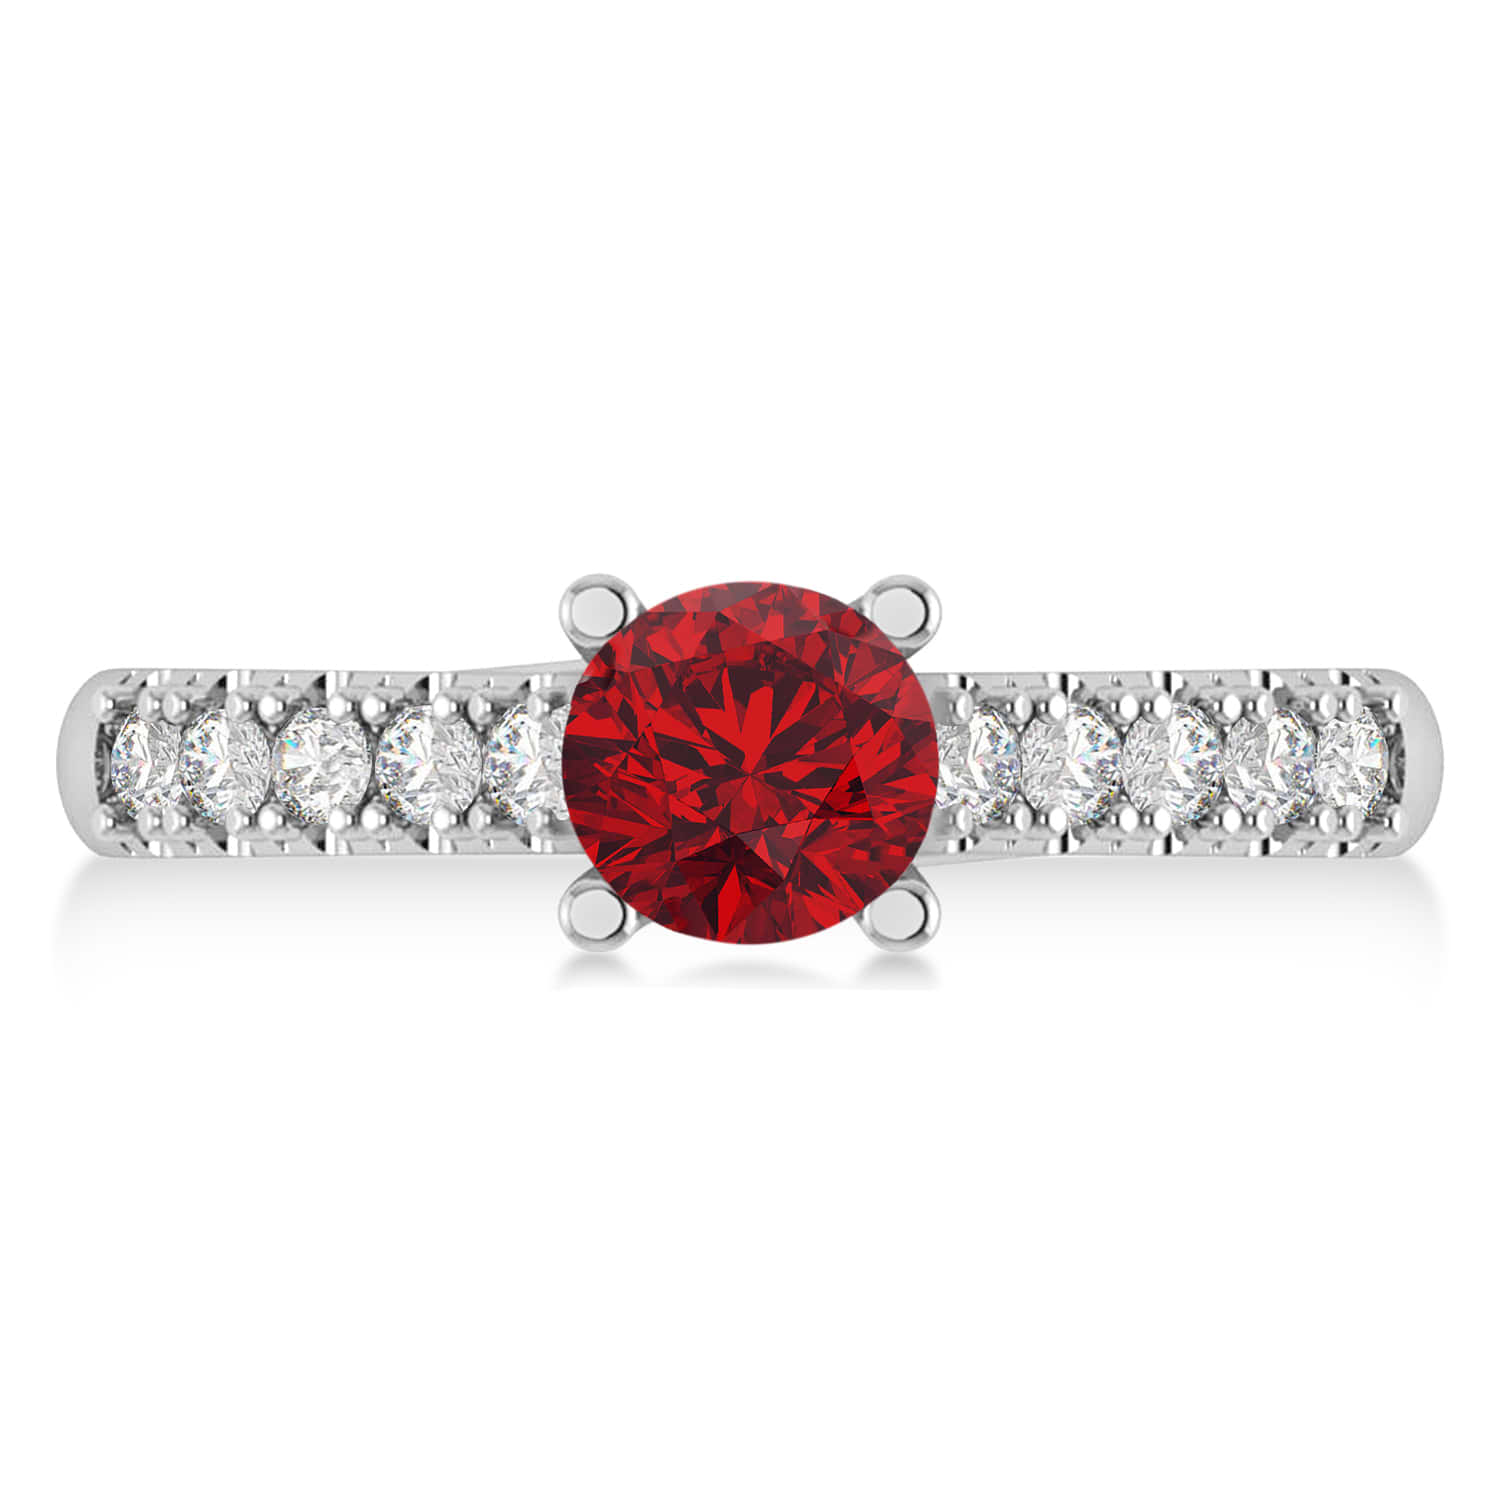 Ruby & Diamond Accented Pre-Set Engagement Ring 14k White Gold (1.05ct)